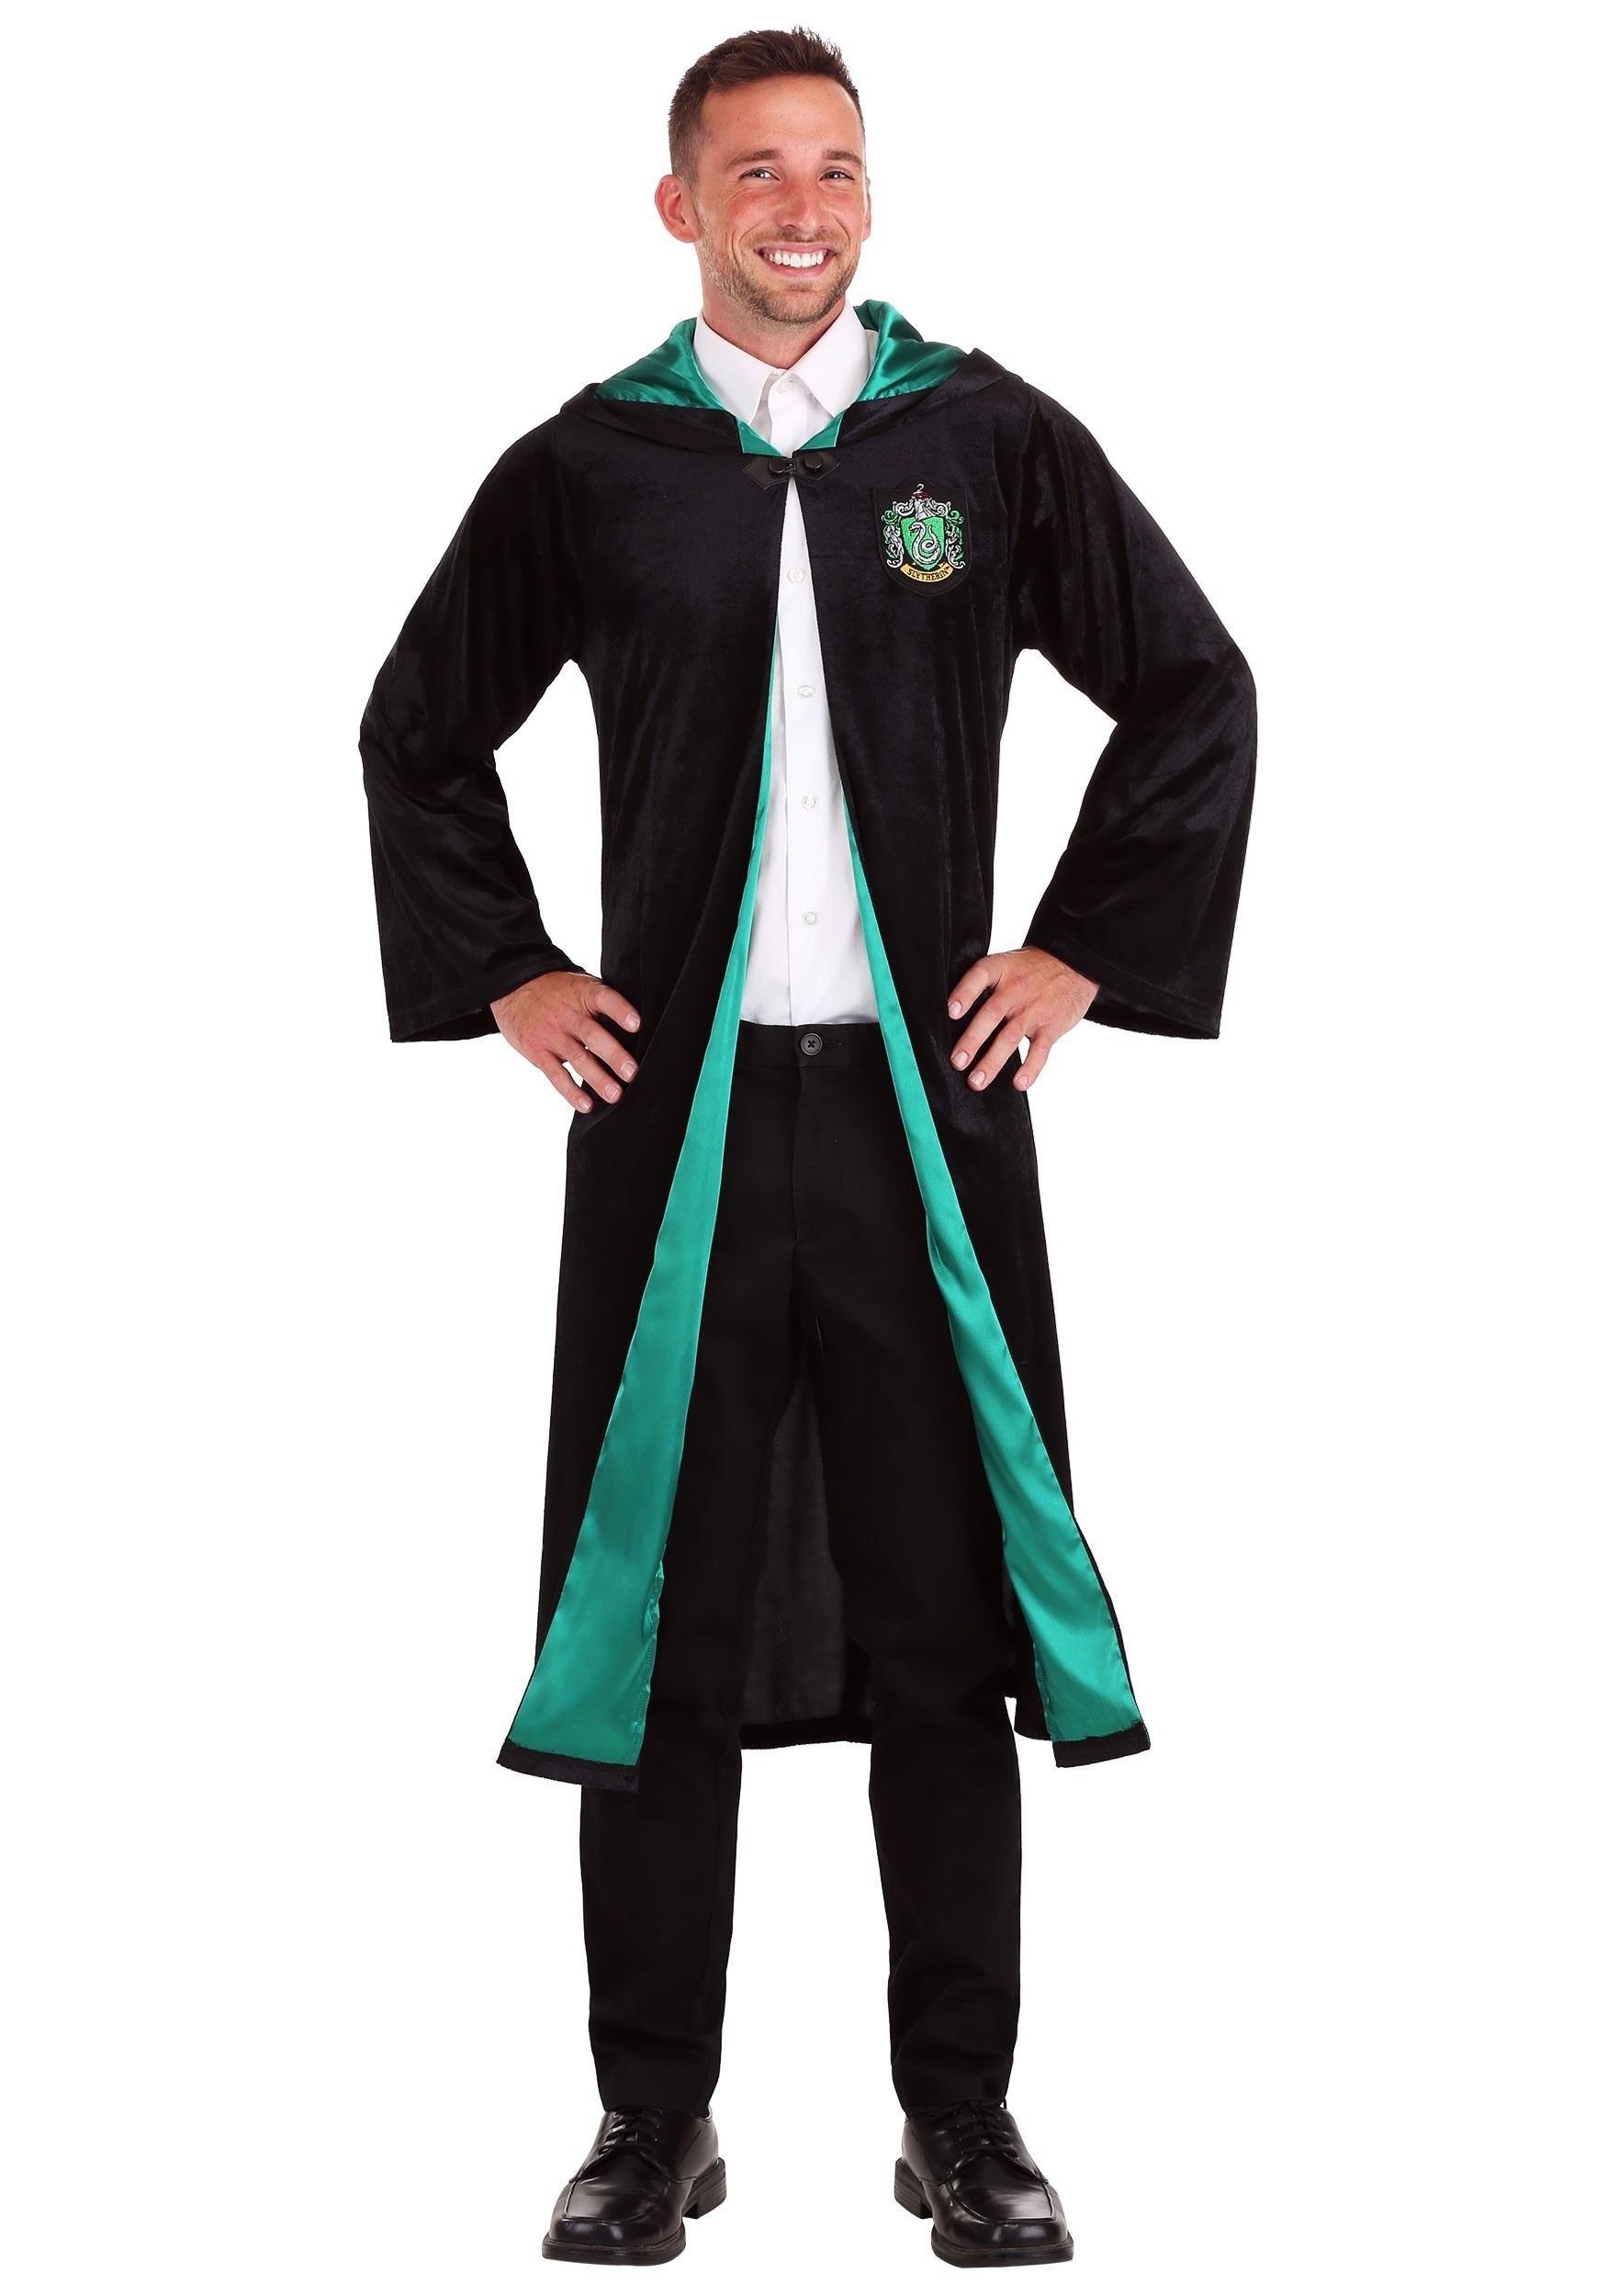 Adult's Harry Potter Slytherin Student Robe Deluxe Men's Costume